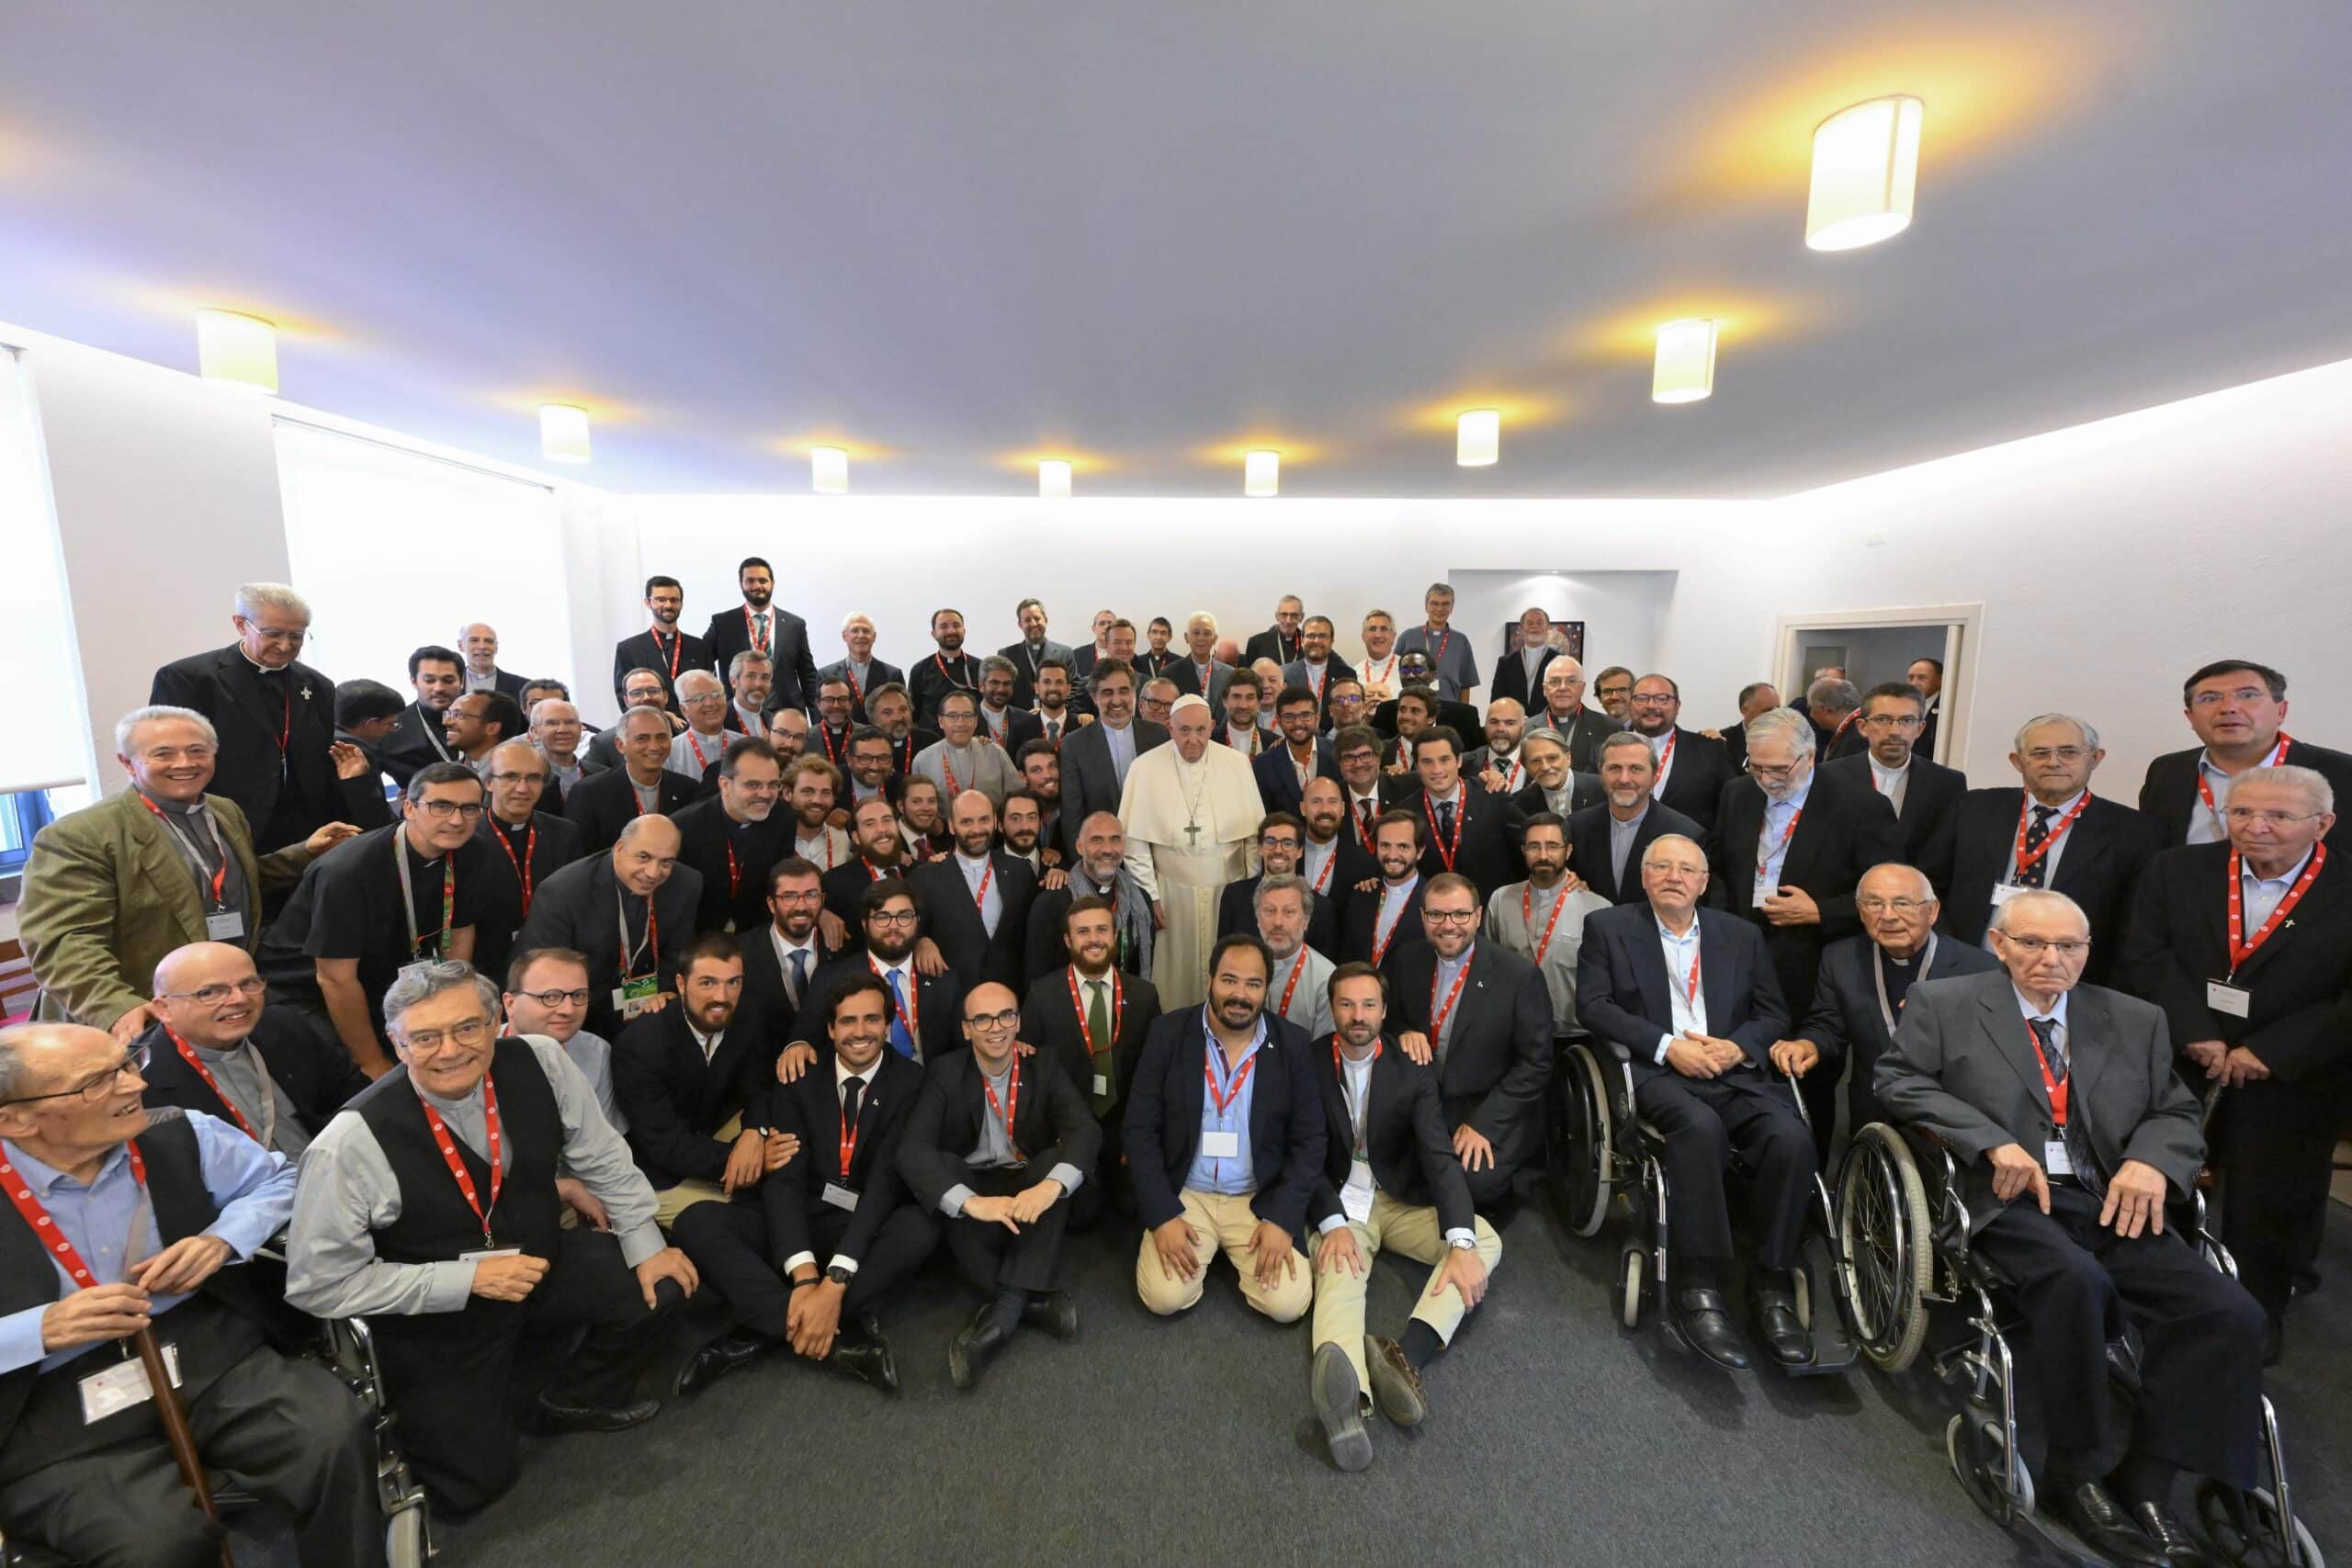 Pope Francis poses for a photo with about 90 Jesuits at their St. John de Brito College in Lisbon, Portugal, Aug. 5, 2023. (CNS photo/Vatican Media)